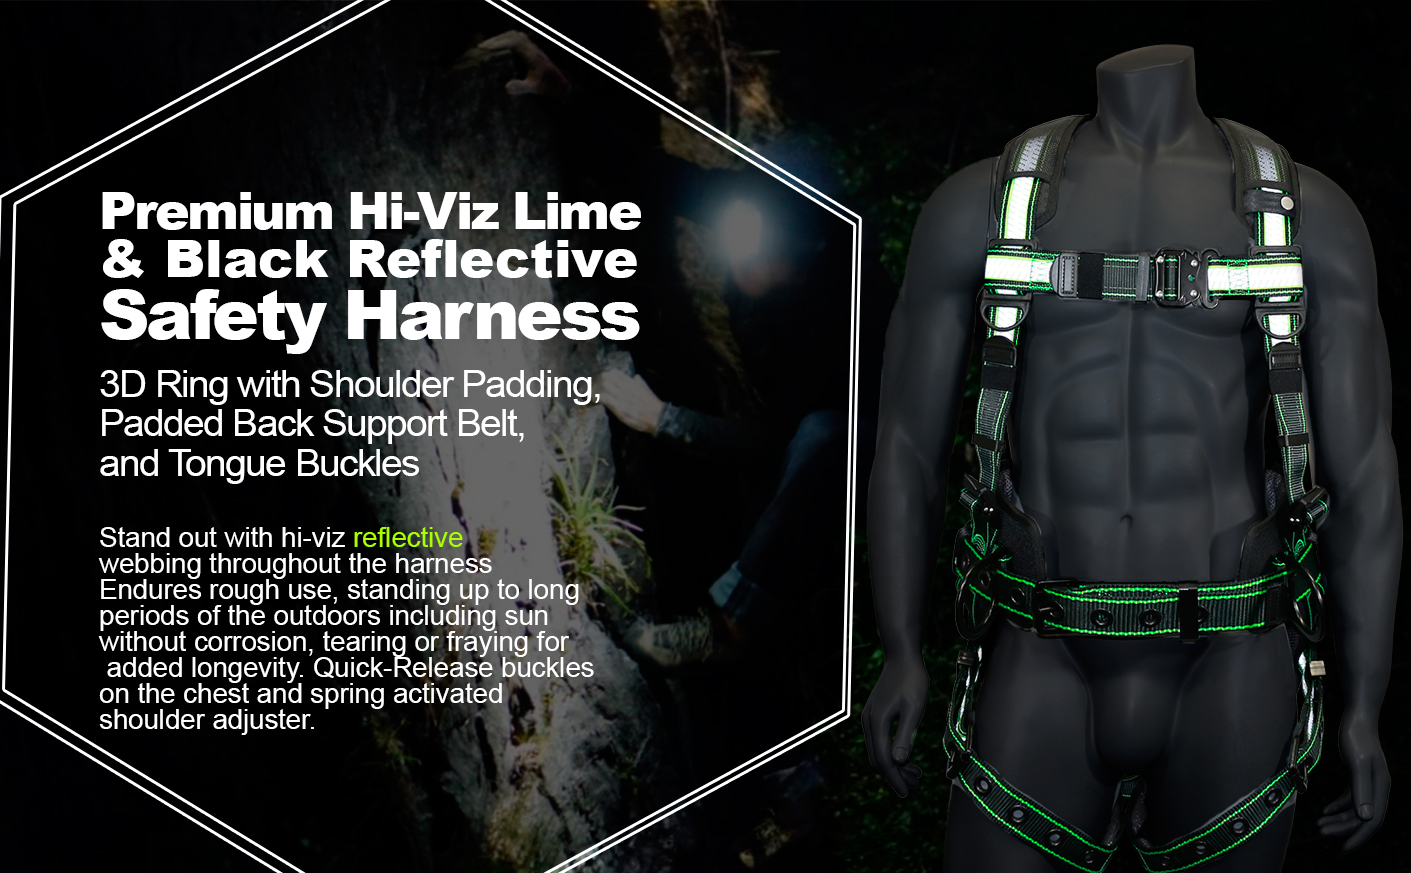 AFP-Fall-Protection-Premium-Hi-Viz-Lime-Black-Reflective-Safety-Harness-Vented-Padded-Shoulder-Legs-Back-8-Thick-Back-Support-Belt-3-D-Rings-Tongue-Buckle-Quick-Release-OSHA-ANSI-PPE